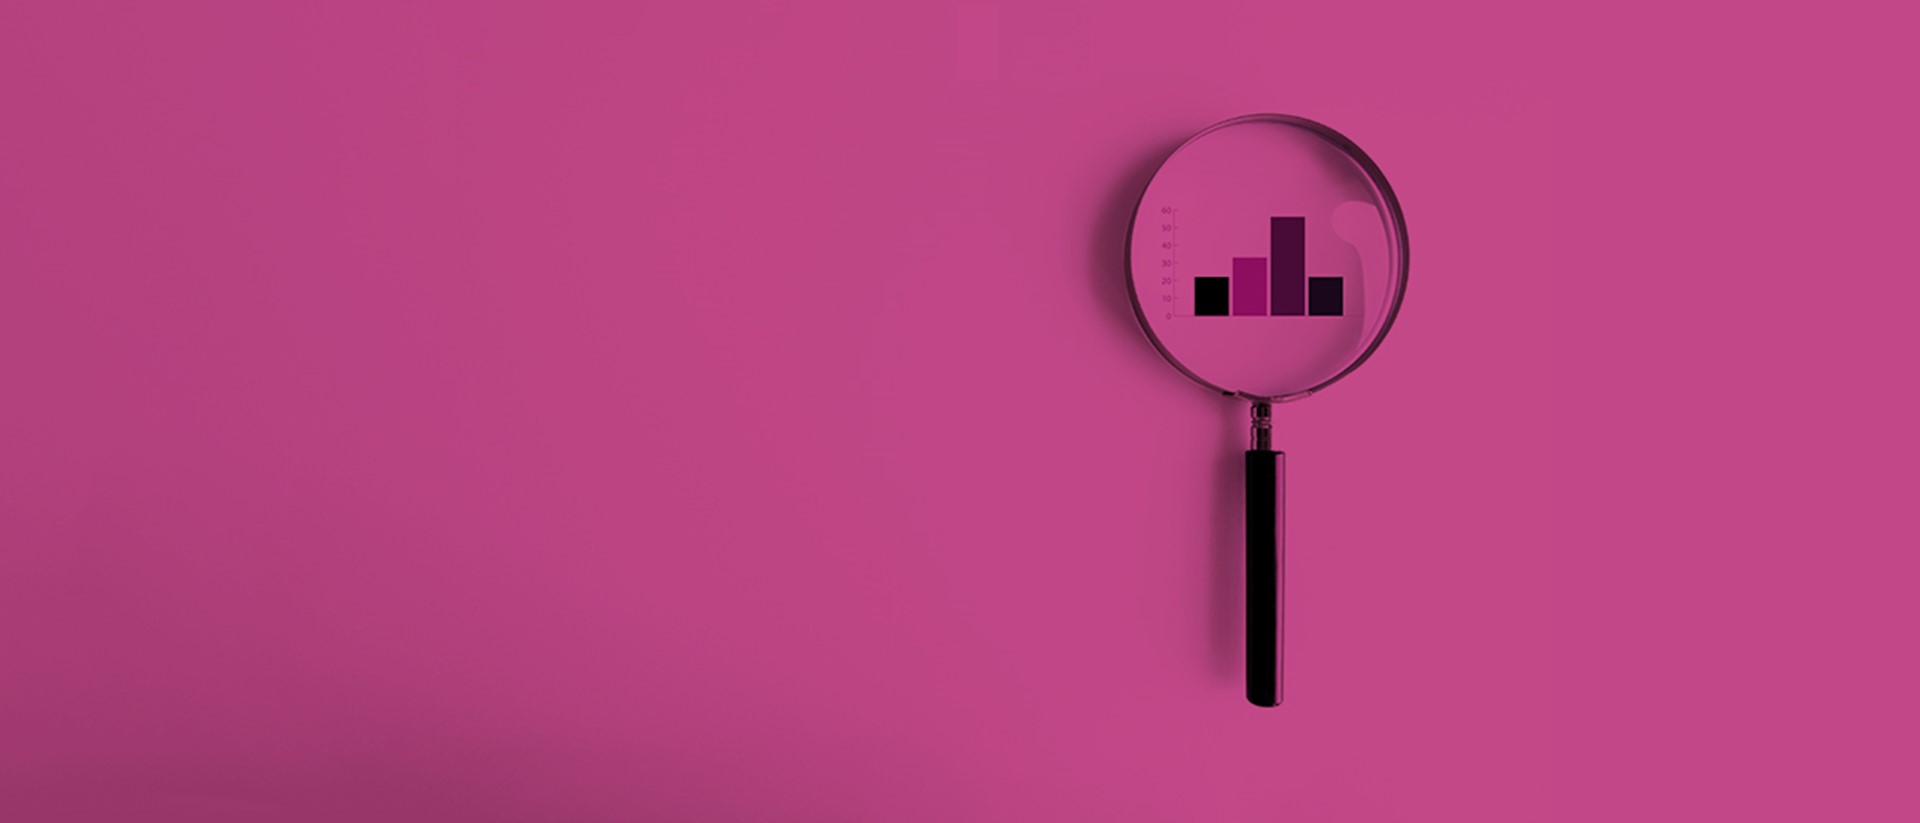 Image of a magnifying glass on a pink background